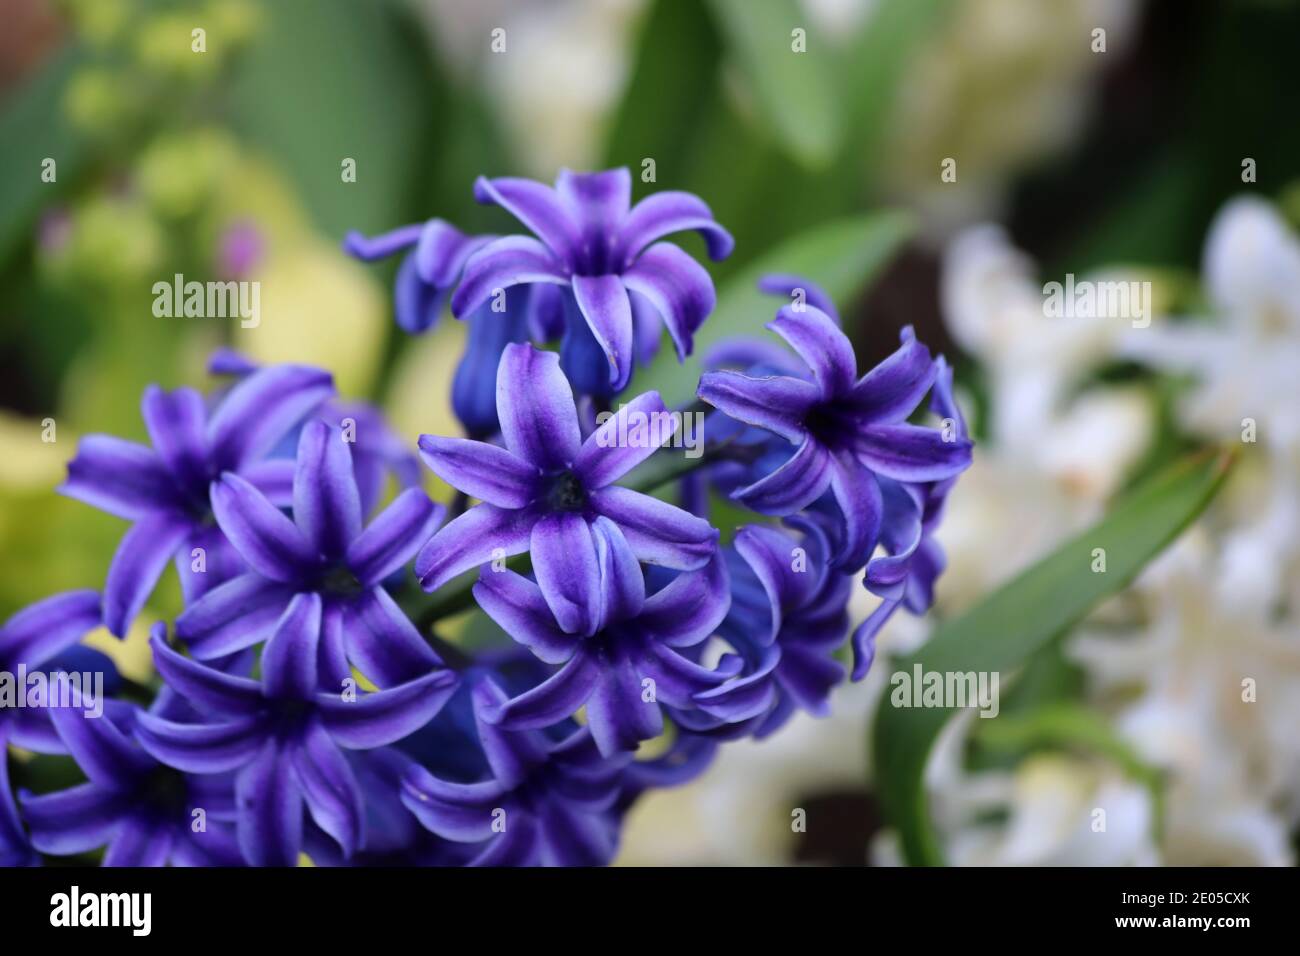 Hyacinths bloom in an explosion of purple petals. White hyacinths form the background along with rich green leaves. Stock Photo